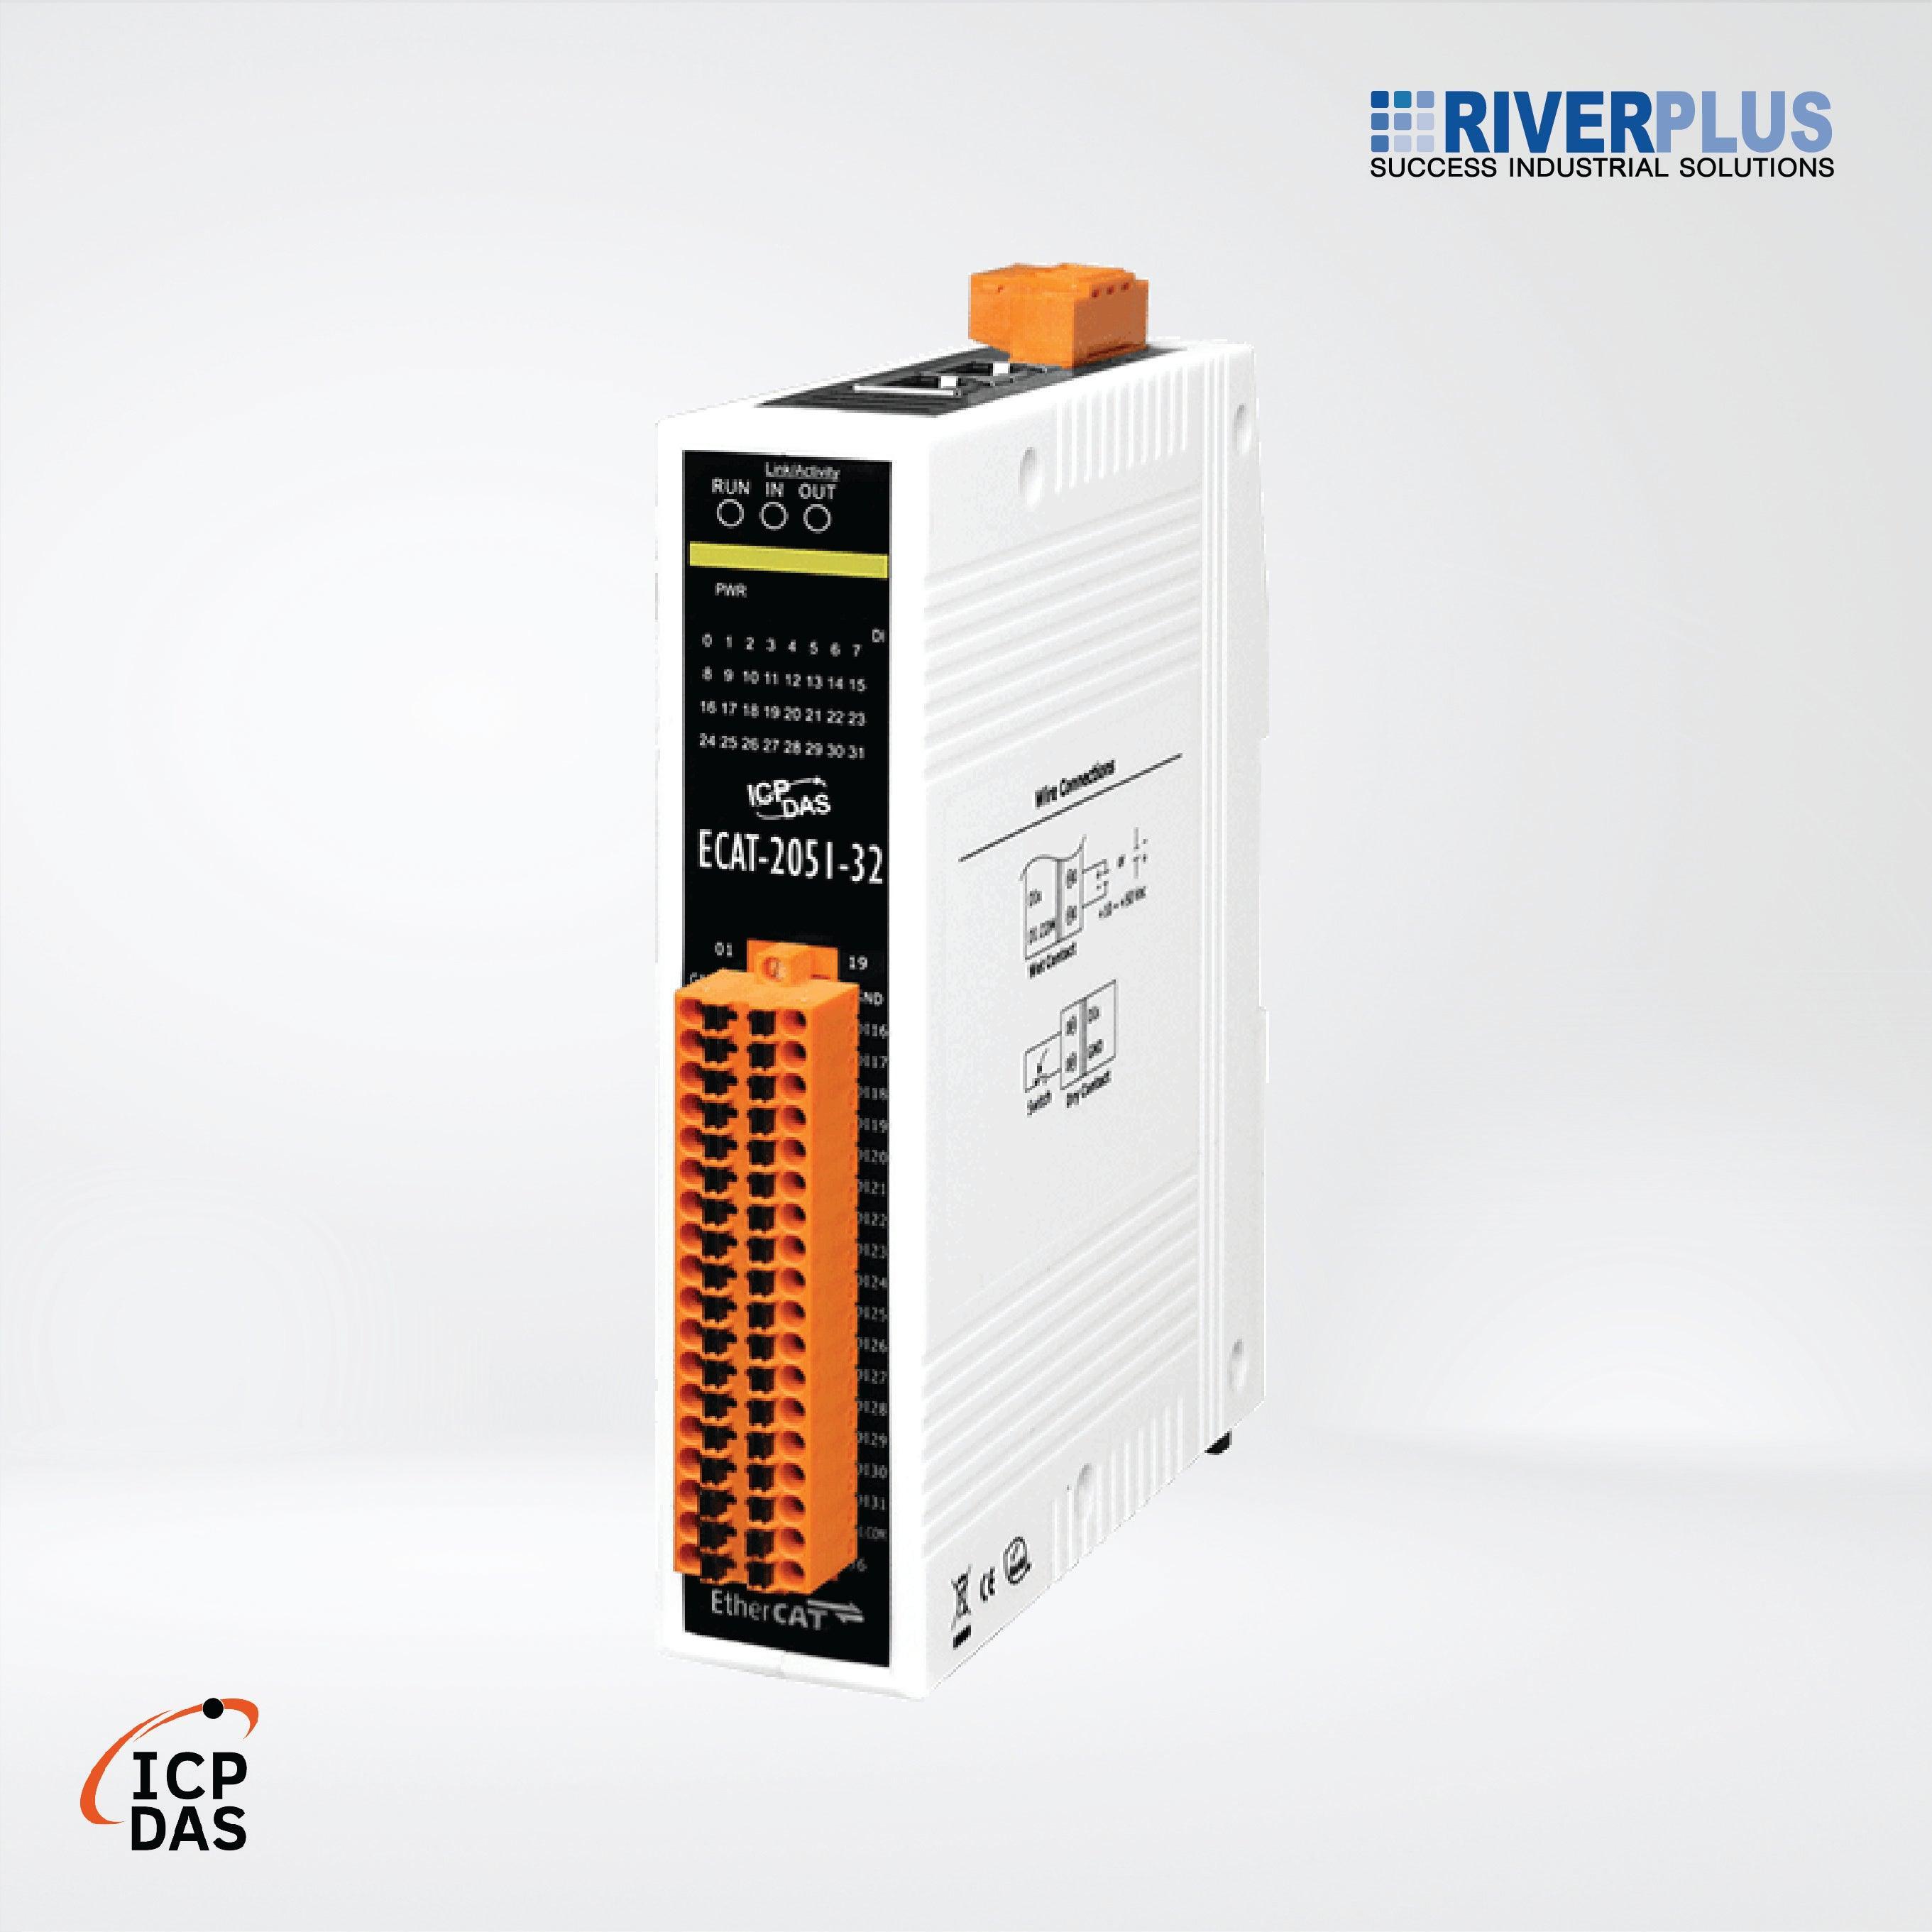 ECAT-2051-32 EtherCAT Slave I/O Module with Isolated 32-ch DI - Riverplus